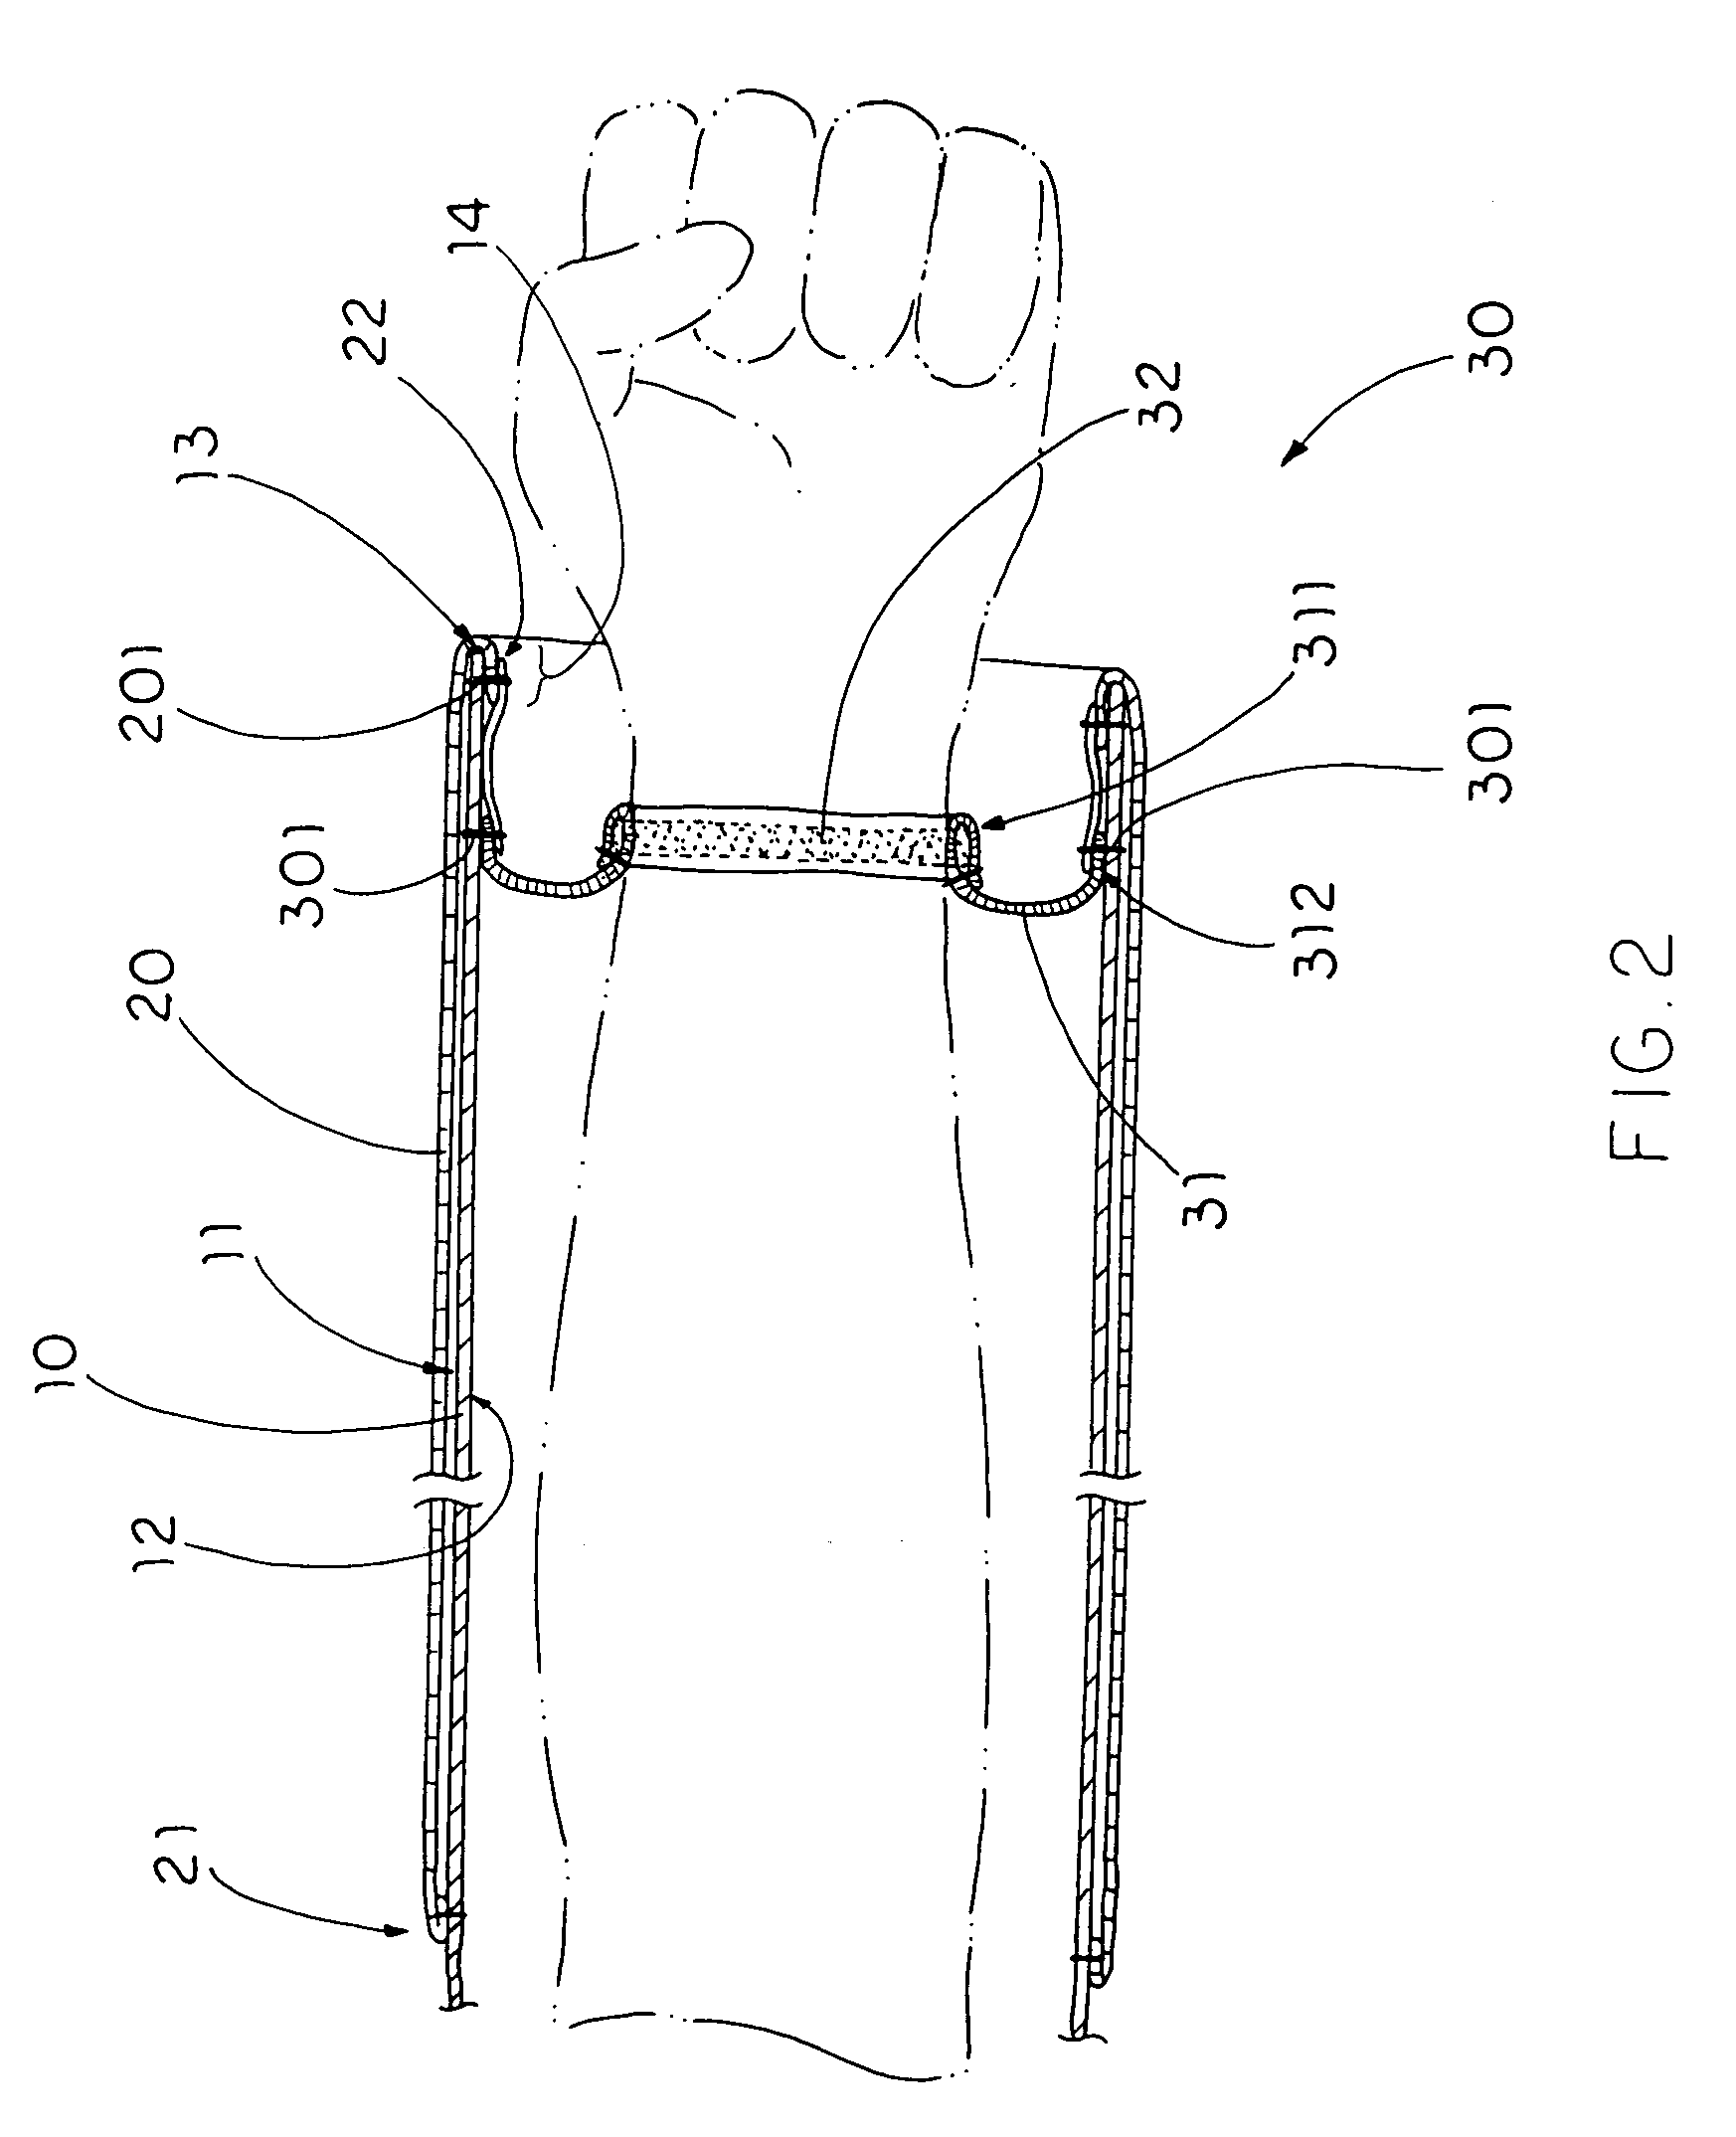 Sanitary arm sleeve structure